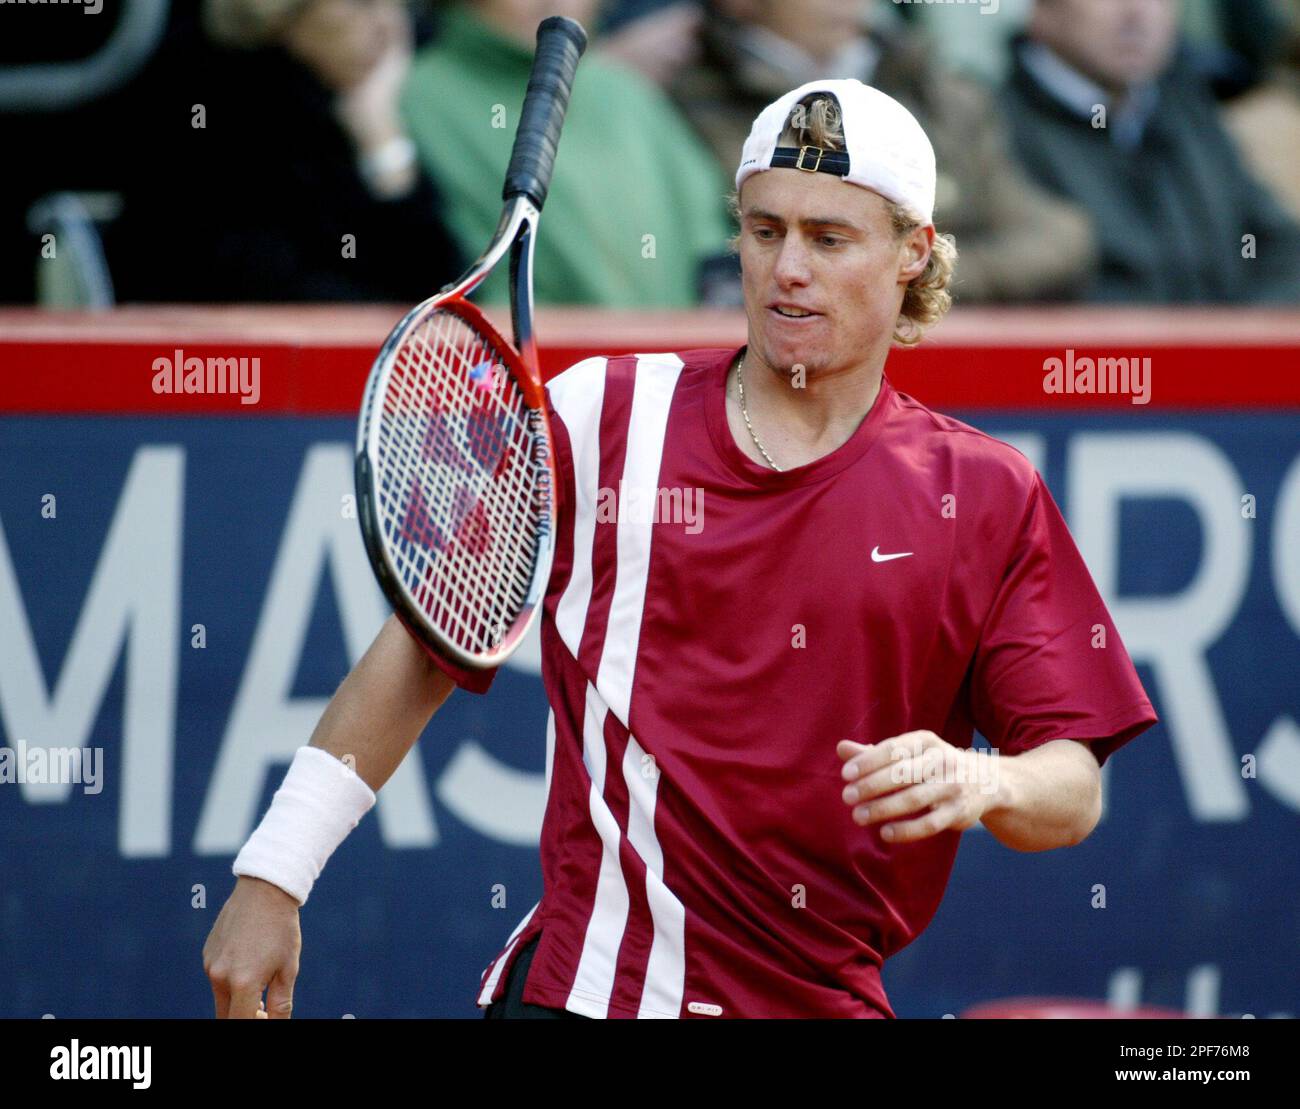 A dejected Lleyton Hewitt from Australia hurls his racket during his match  vs Fernando Gonzales from Chile during current Tennis Masters Hamburg 2003  in Hamburg, northern Germany, on Thursday, May 15, 2003.